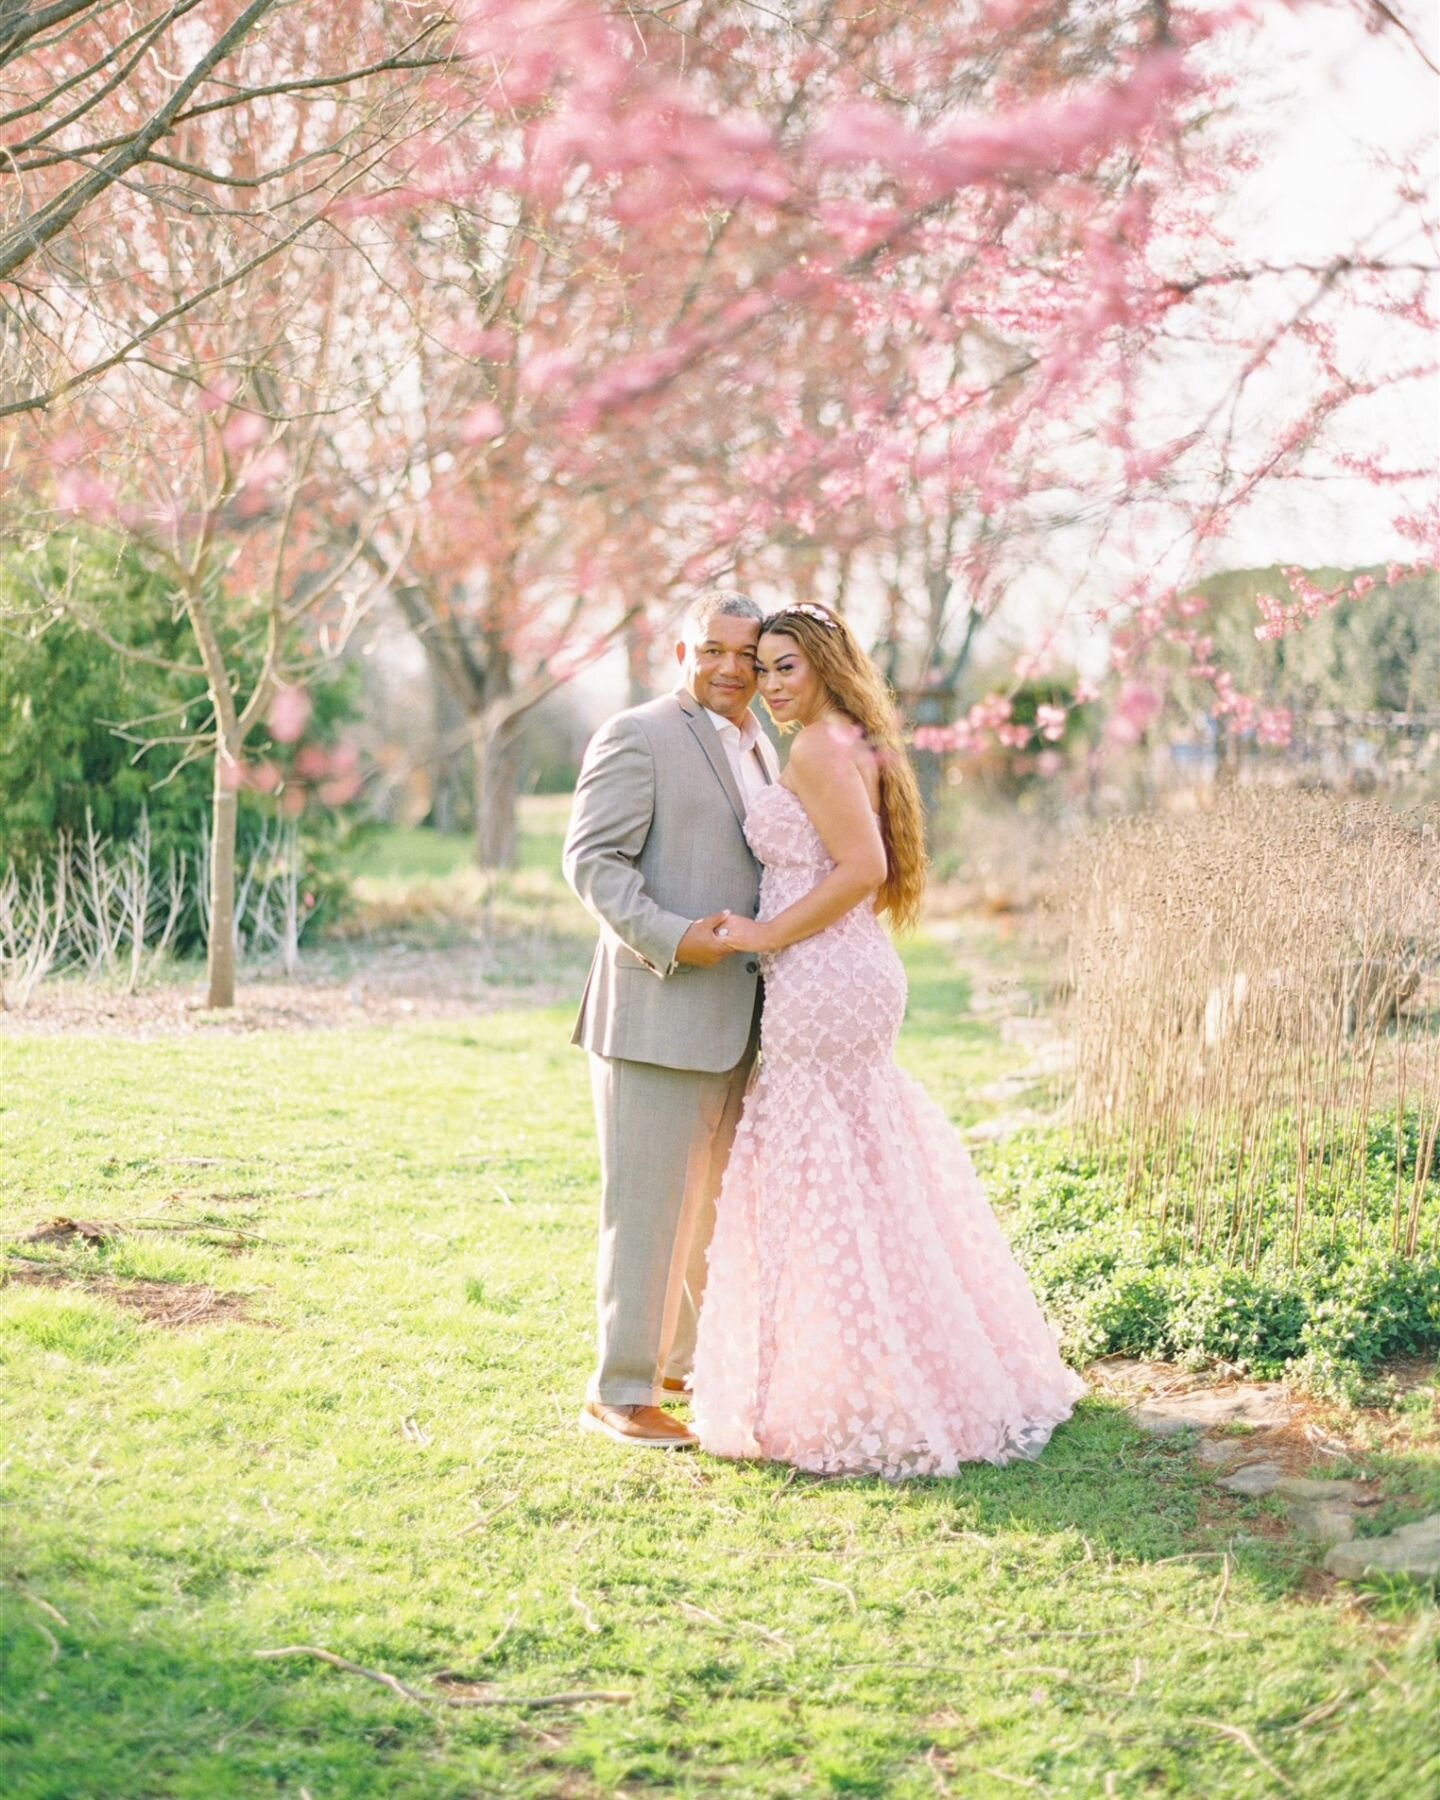 Embracing early spring at UT Gardens in Knoxville ✨ Captured on Portra 800 film, this engagement session bathed in gorgeous light is pure magic. 🌿📷 

Anita + Shea
.
.
.
.
#FilmPhotography #KnoxvilleEngagement #SpringVibes #knoxvilleweddingphotograp